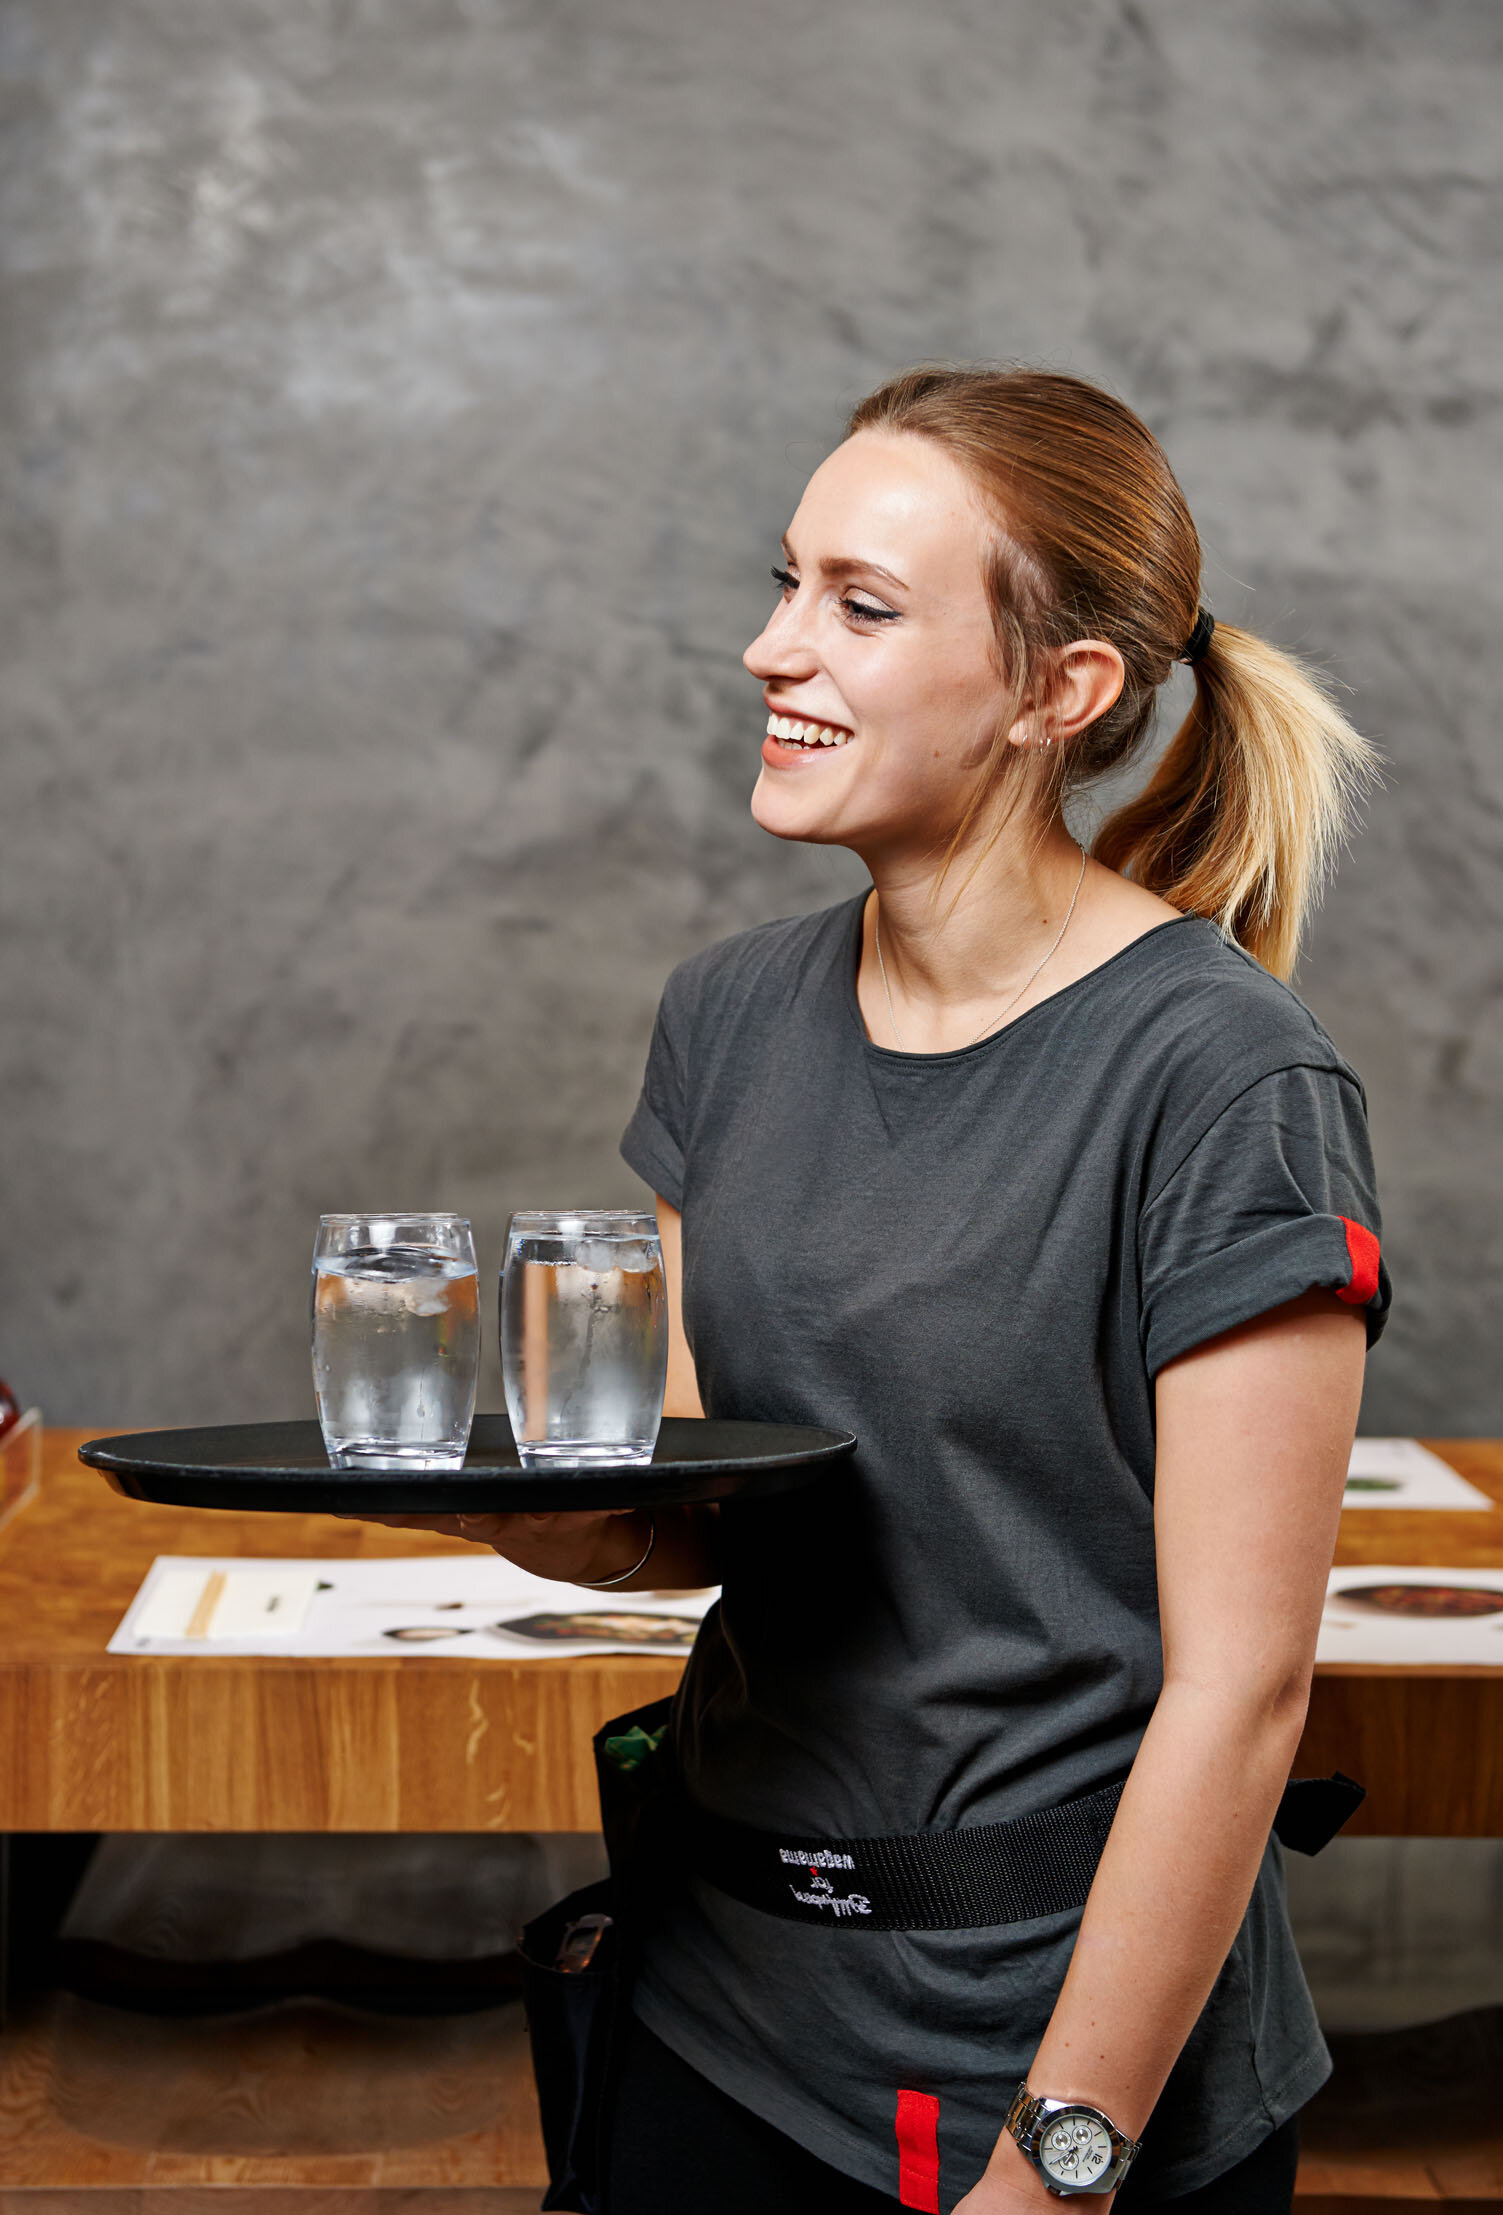 Wagamama staff portraits shot by UK commercial photographer Holly Pickering